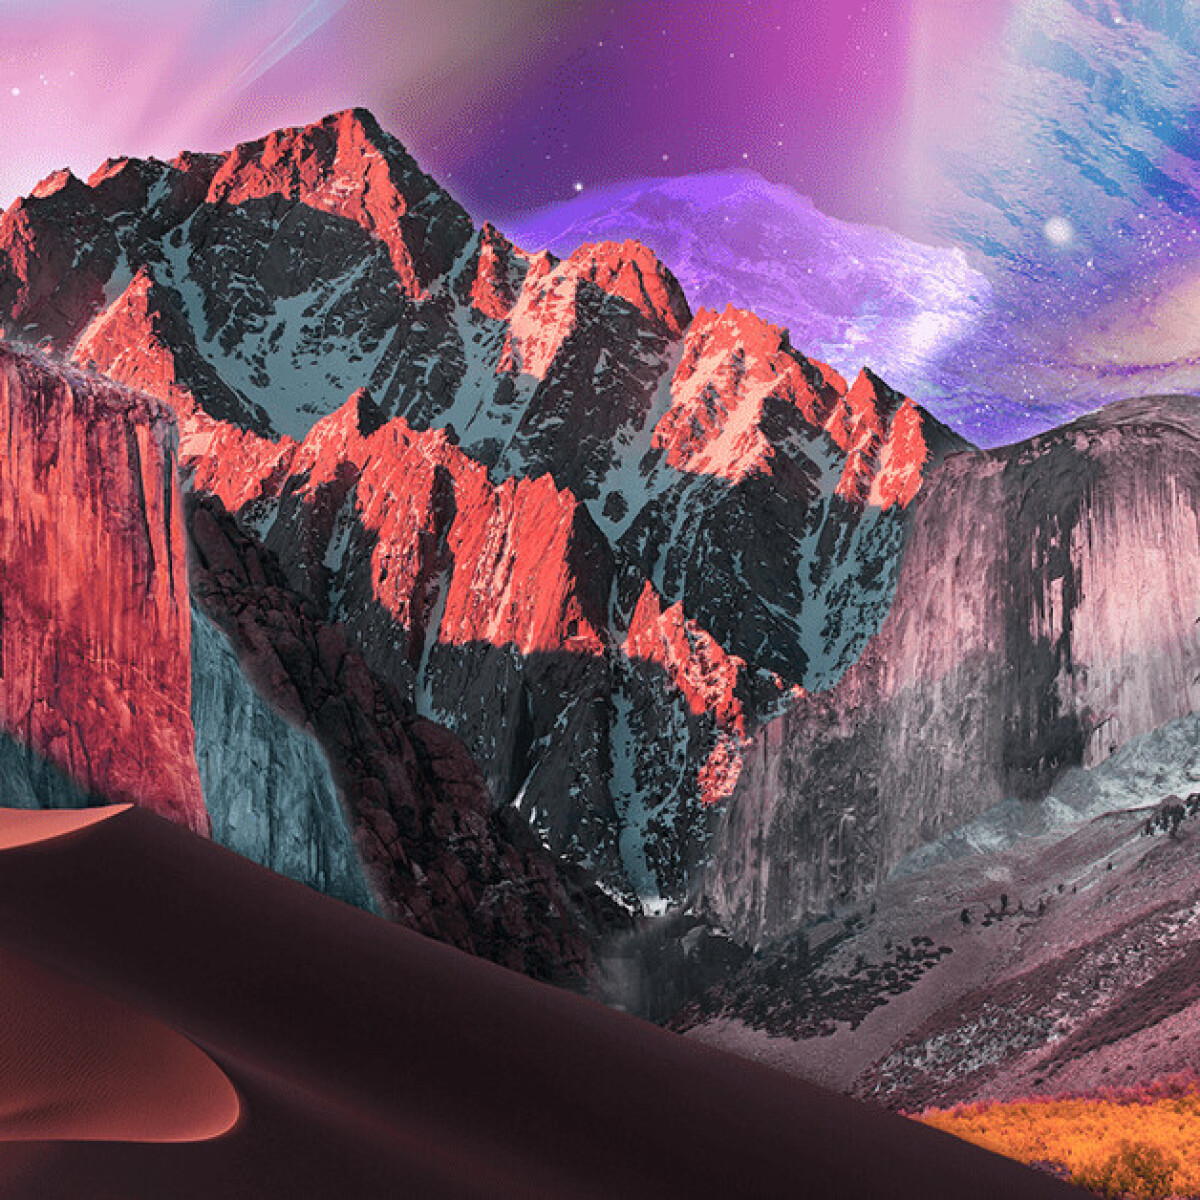 This genius combined every macOS 10 wallpaper into a psychedelic masterpiece